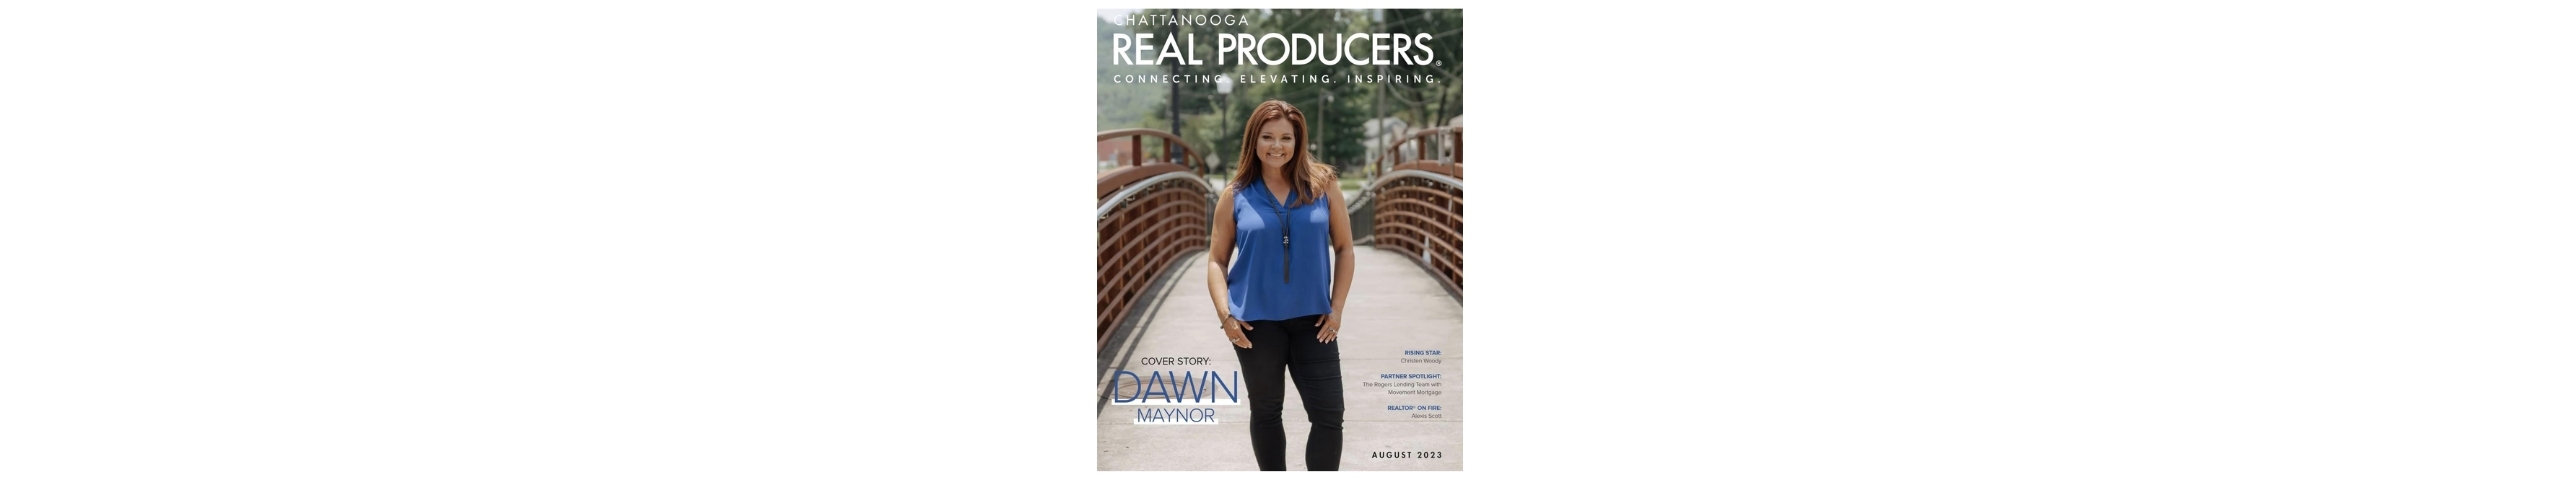 Preview image of Dawn Maynor: Chattanooga Real Producer's August 2023 Cover Story